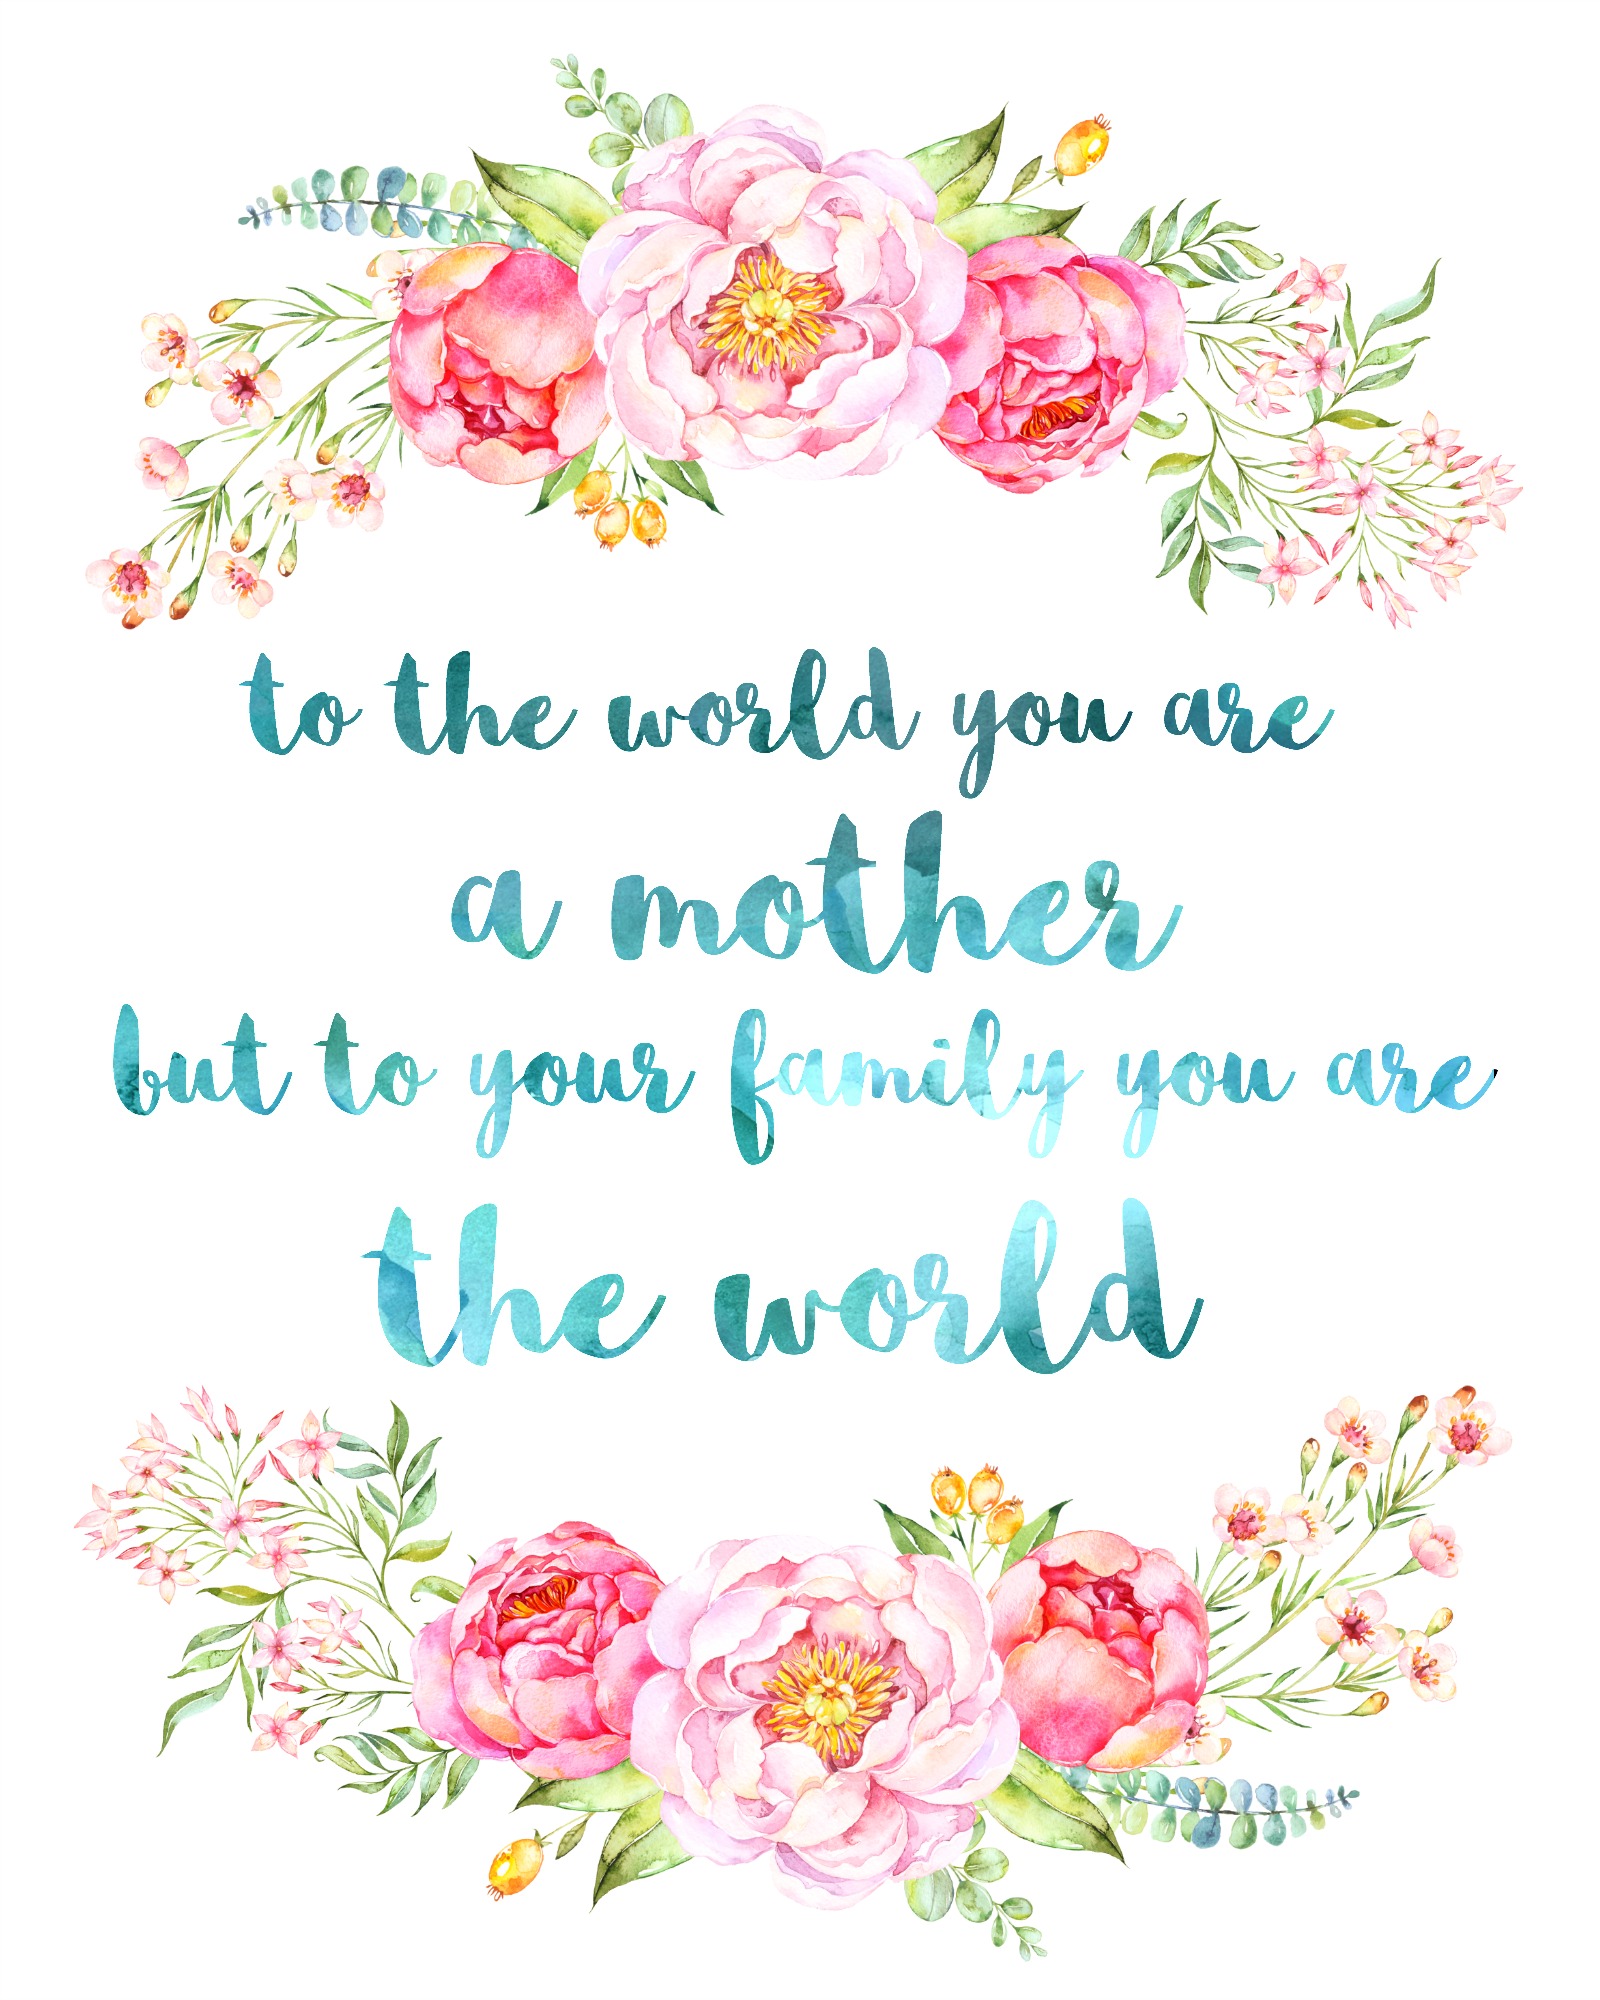 To the world you are a mother but to your family you are the world quote.